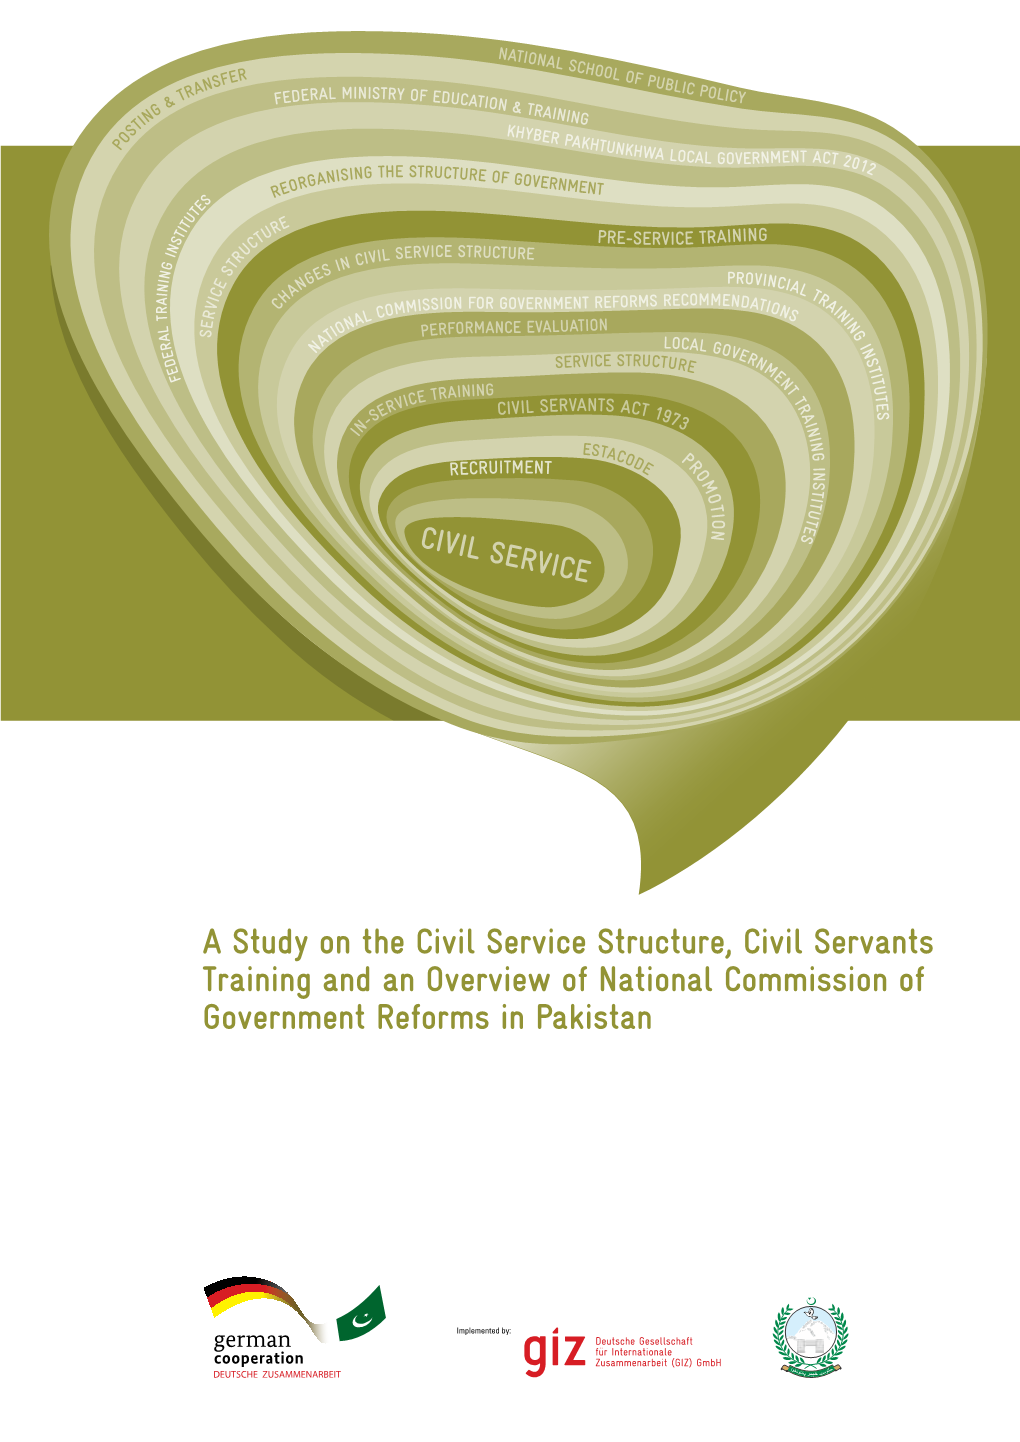 A Study on the Civil Service Structure, Civil Servants Training and an Overview of National Commission of Government Reforms in Pakistan